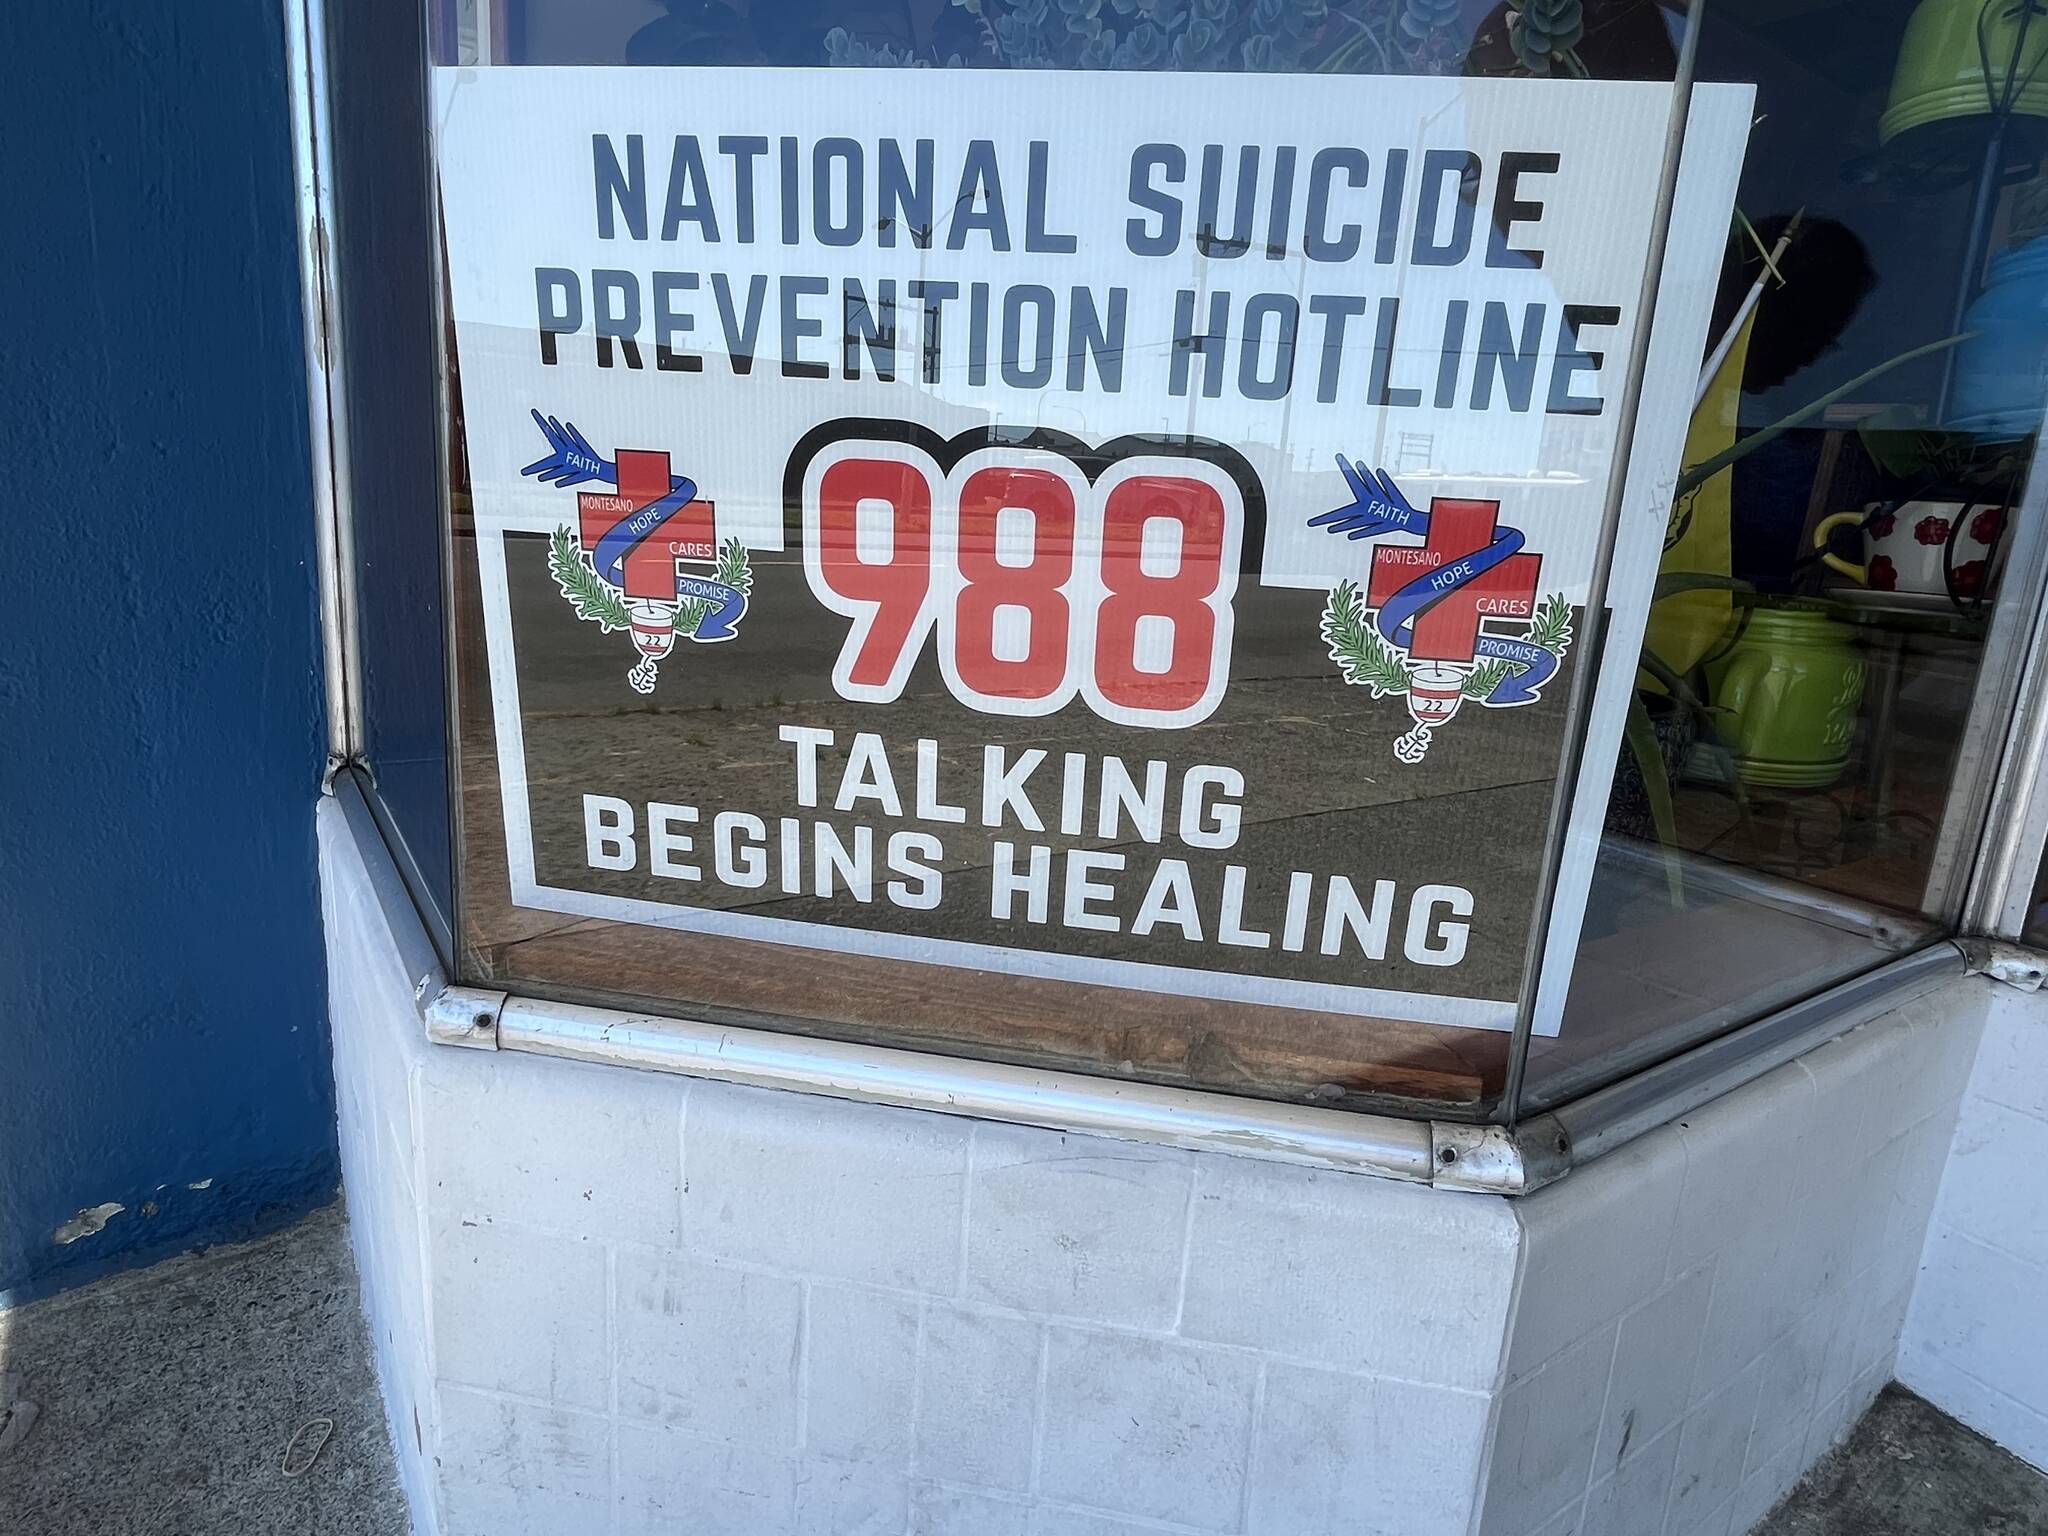 The Daily World file photo
For people thinking about suicide, call 988, the official National Suicide Prevention Hotline phone number.